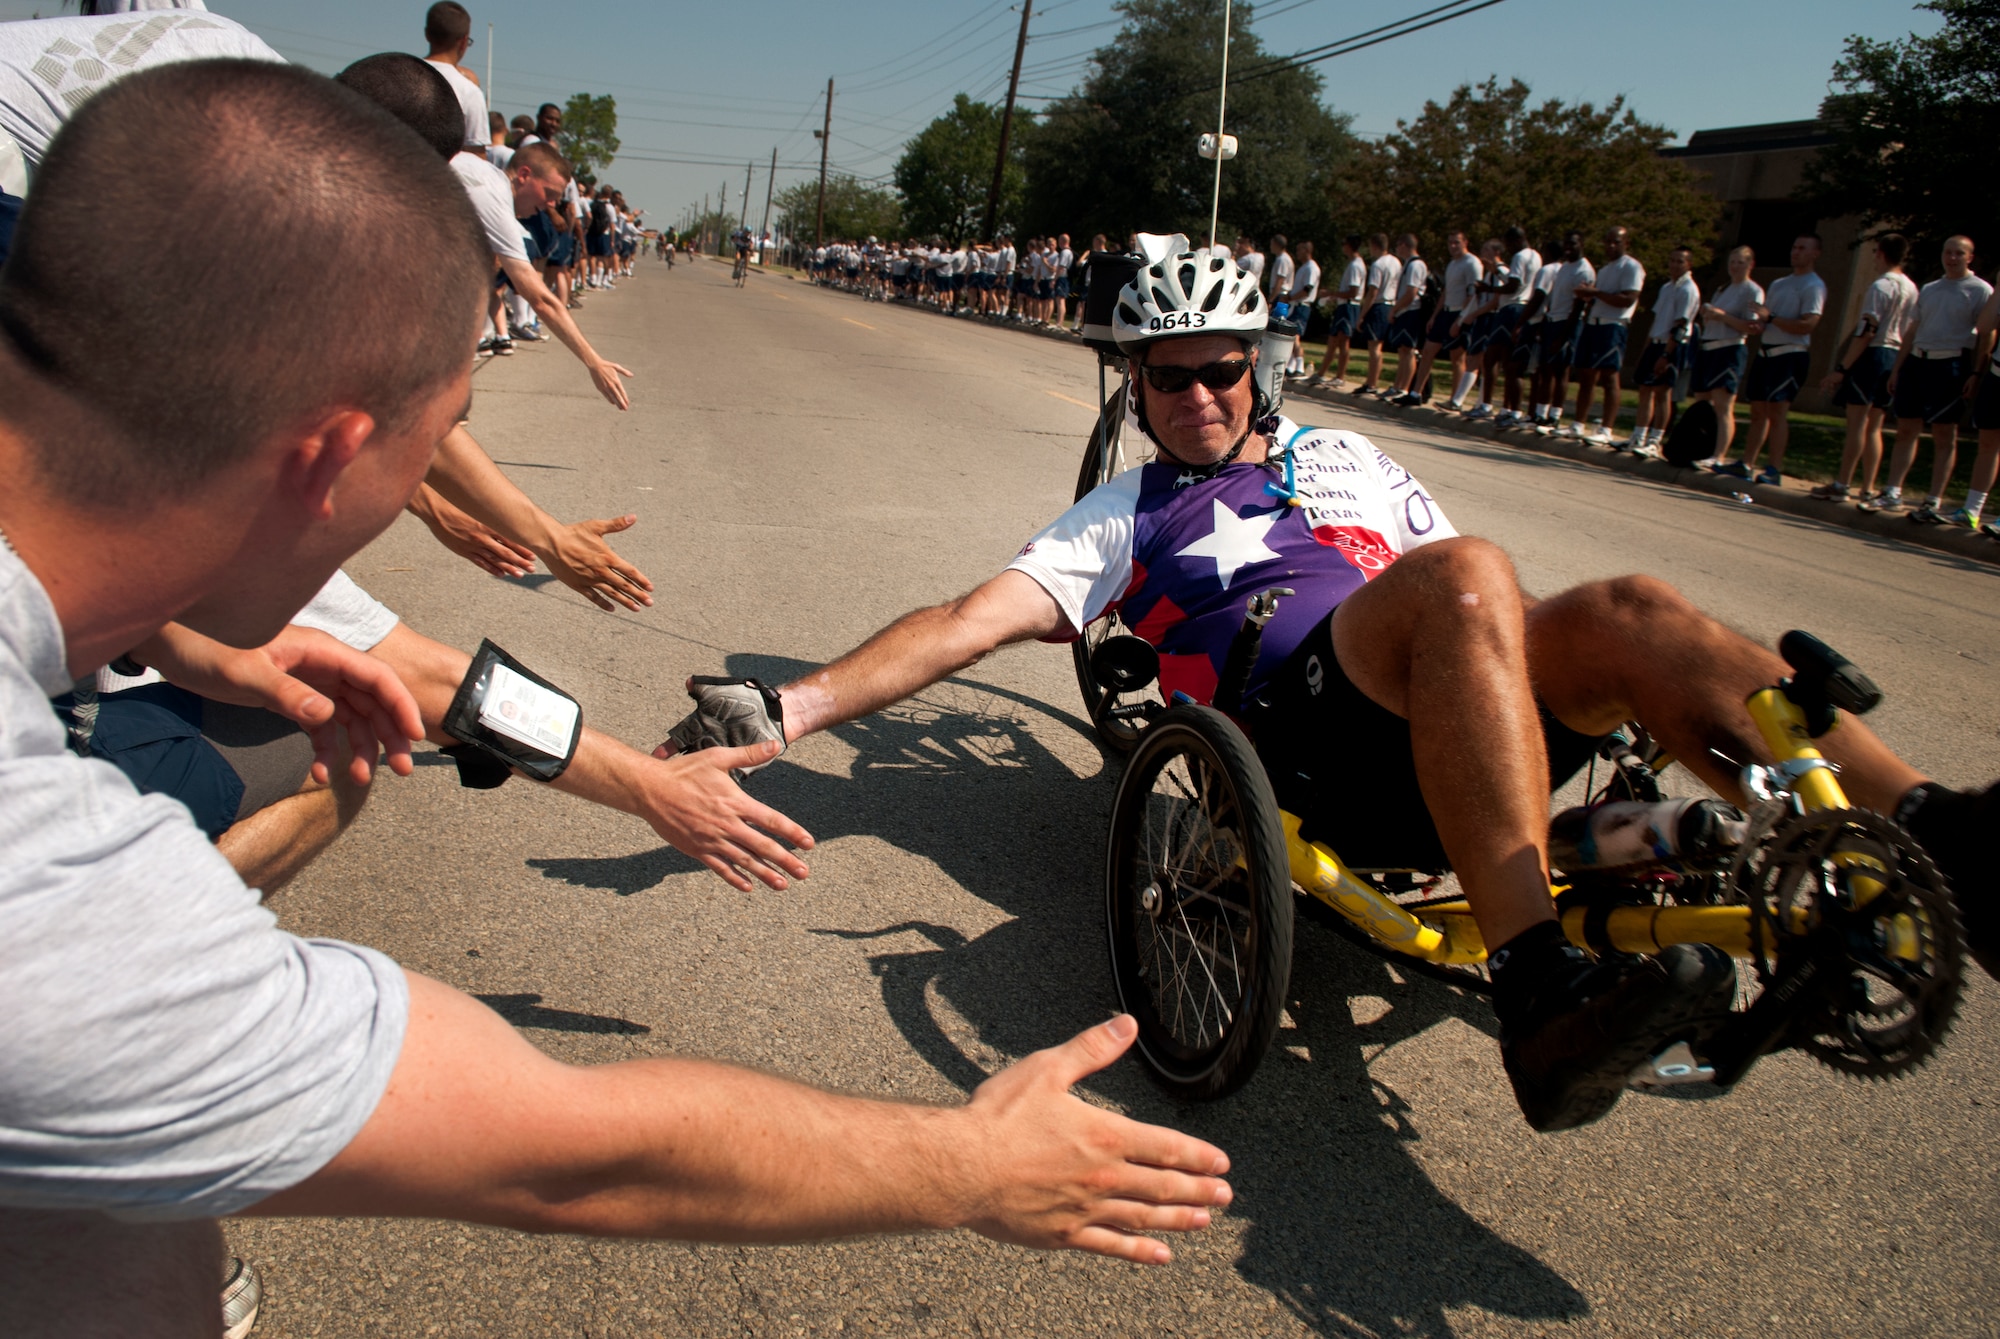 A Hotter'N Hell Hundred rider greets Airmen in training at Sheppard Air Force Base, Texas, on his way out of the base Aug. 24, 2013. After "Airpower Alley" and a rest stop, bicycle riders rode through a gauntlet of hundreds of Airmen screaming and cheering them on to the finish line. The annual race is in its 32 year and celebrates the founding members of the Texoma area with a 100-mile race in 100-degree temperatures. (U.S. Air Force photo/Staff Sgt. Mike Meares)